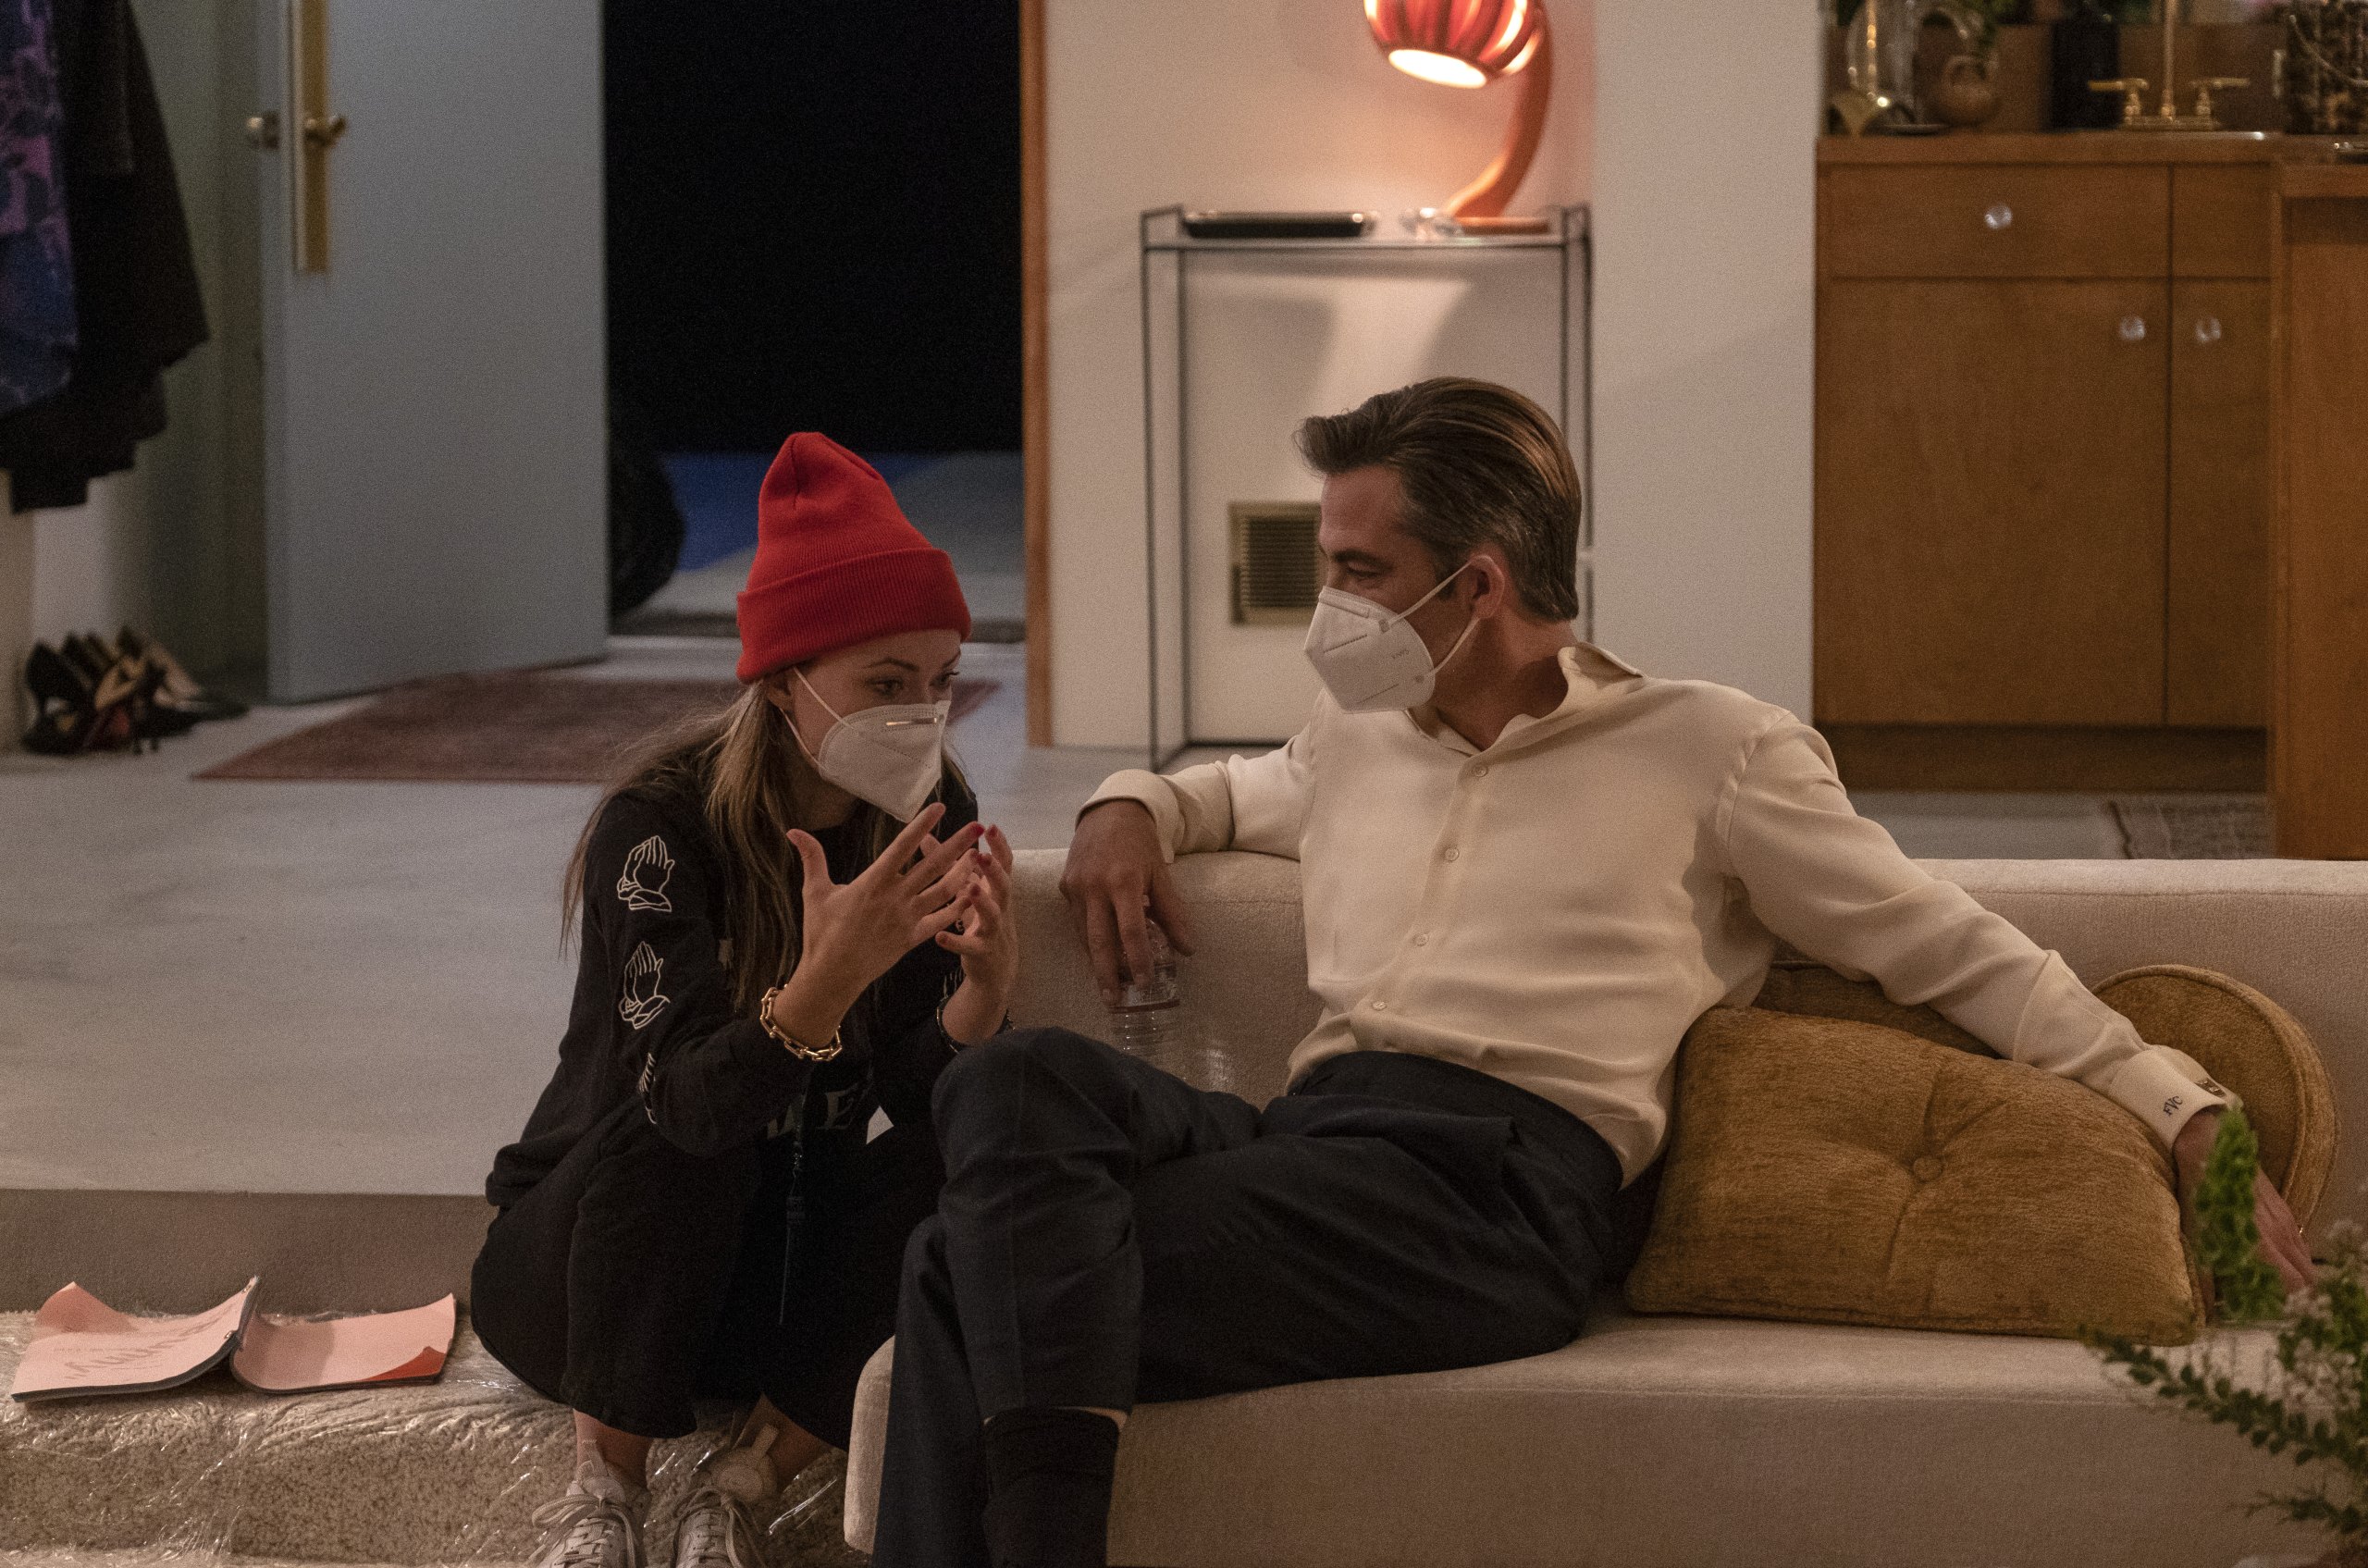 Director, producer and actress Olivia Wilde and Chris Pine on the set of Don't Worry Darling